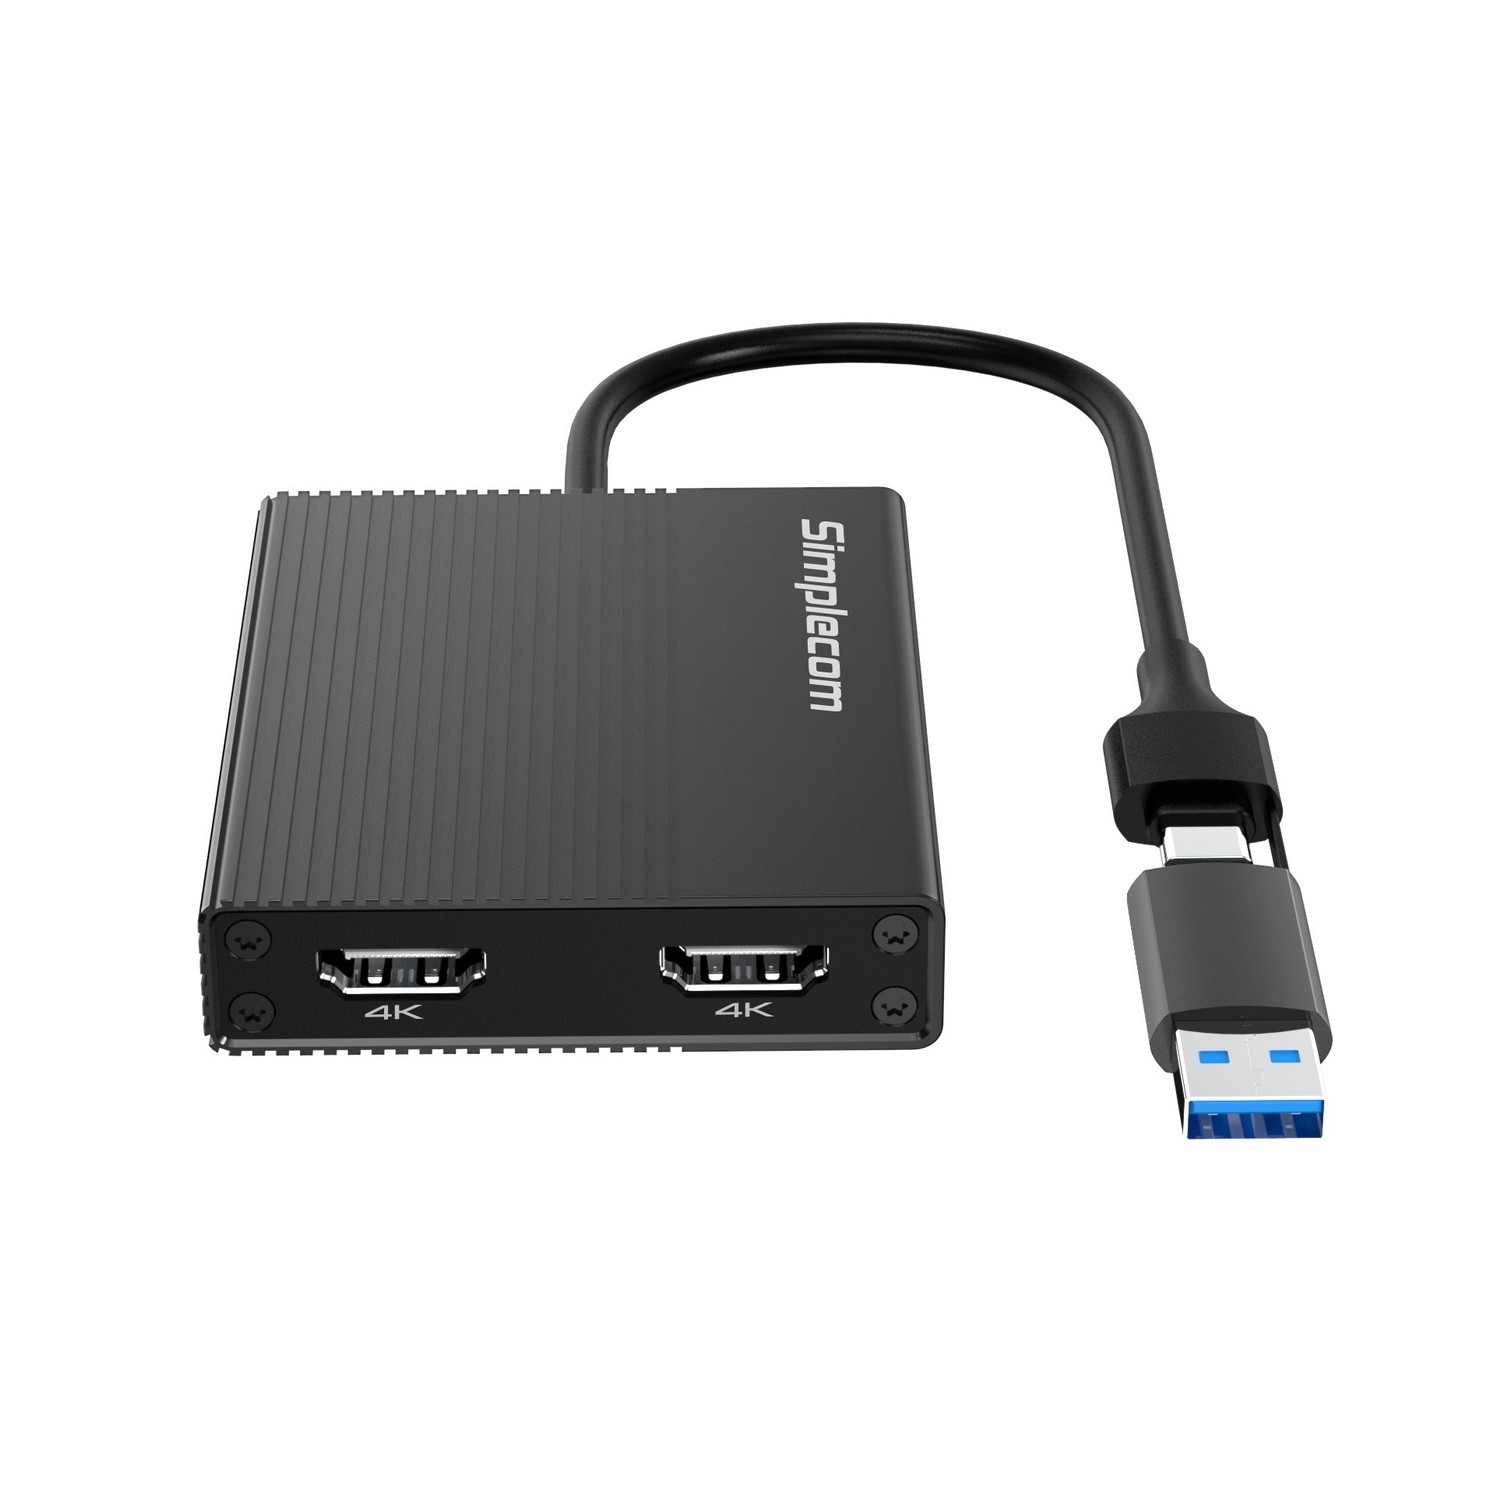 Simplecom DA369 USB 3.0 or USB-C to Dual 4K HDMI 2.0 Display Adapter for 2x 4K@60Hz Extended Screens